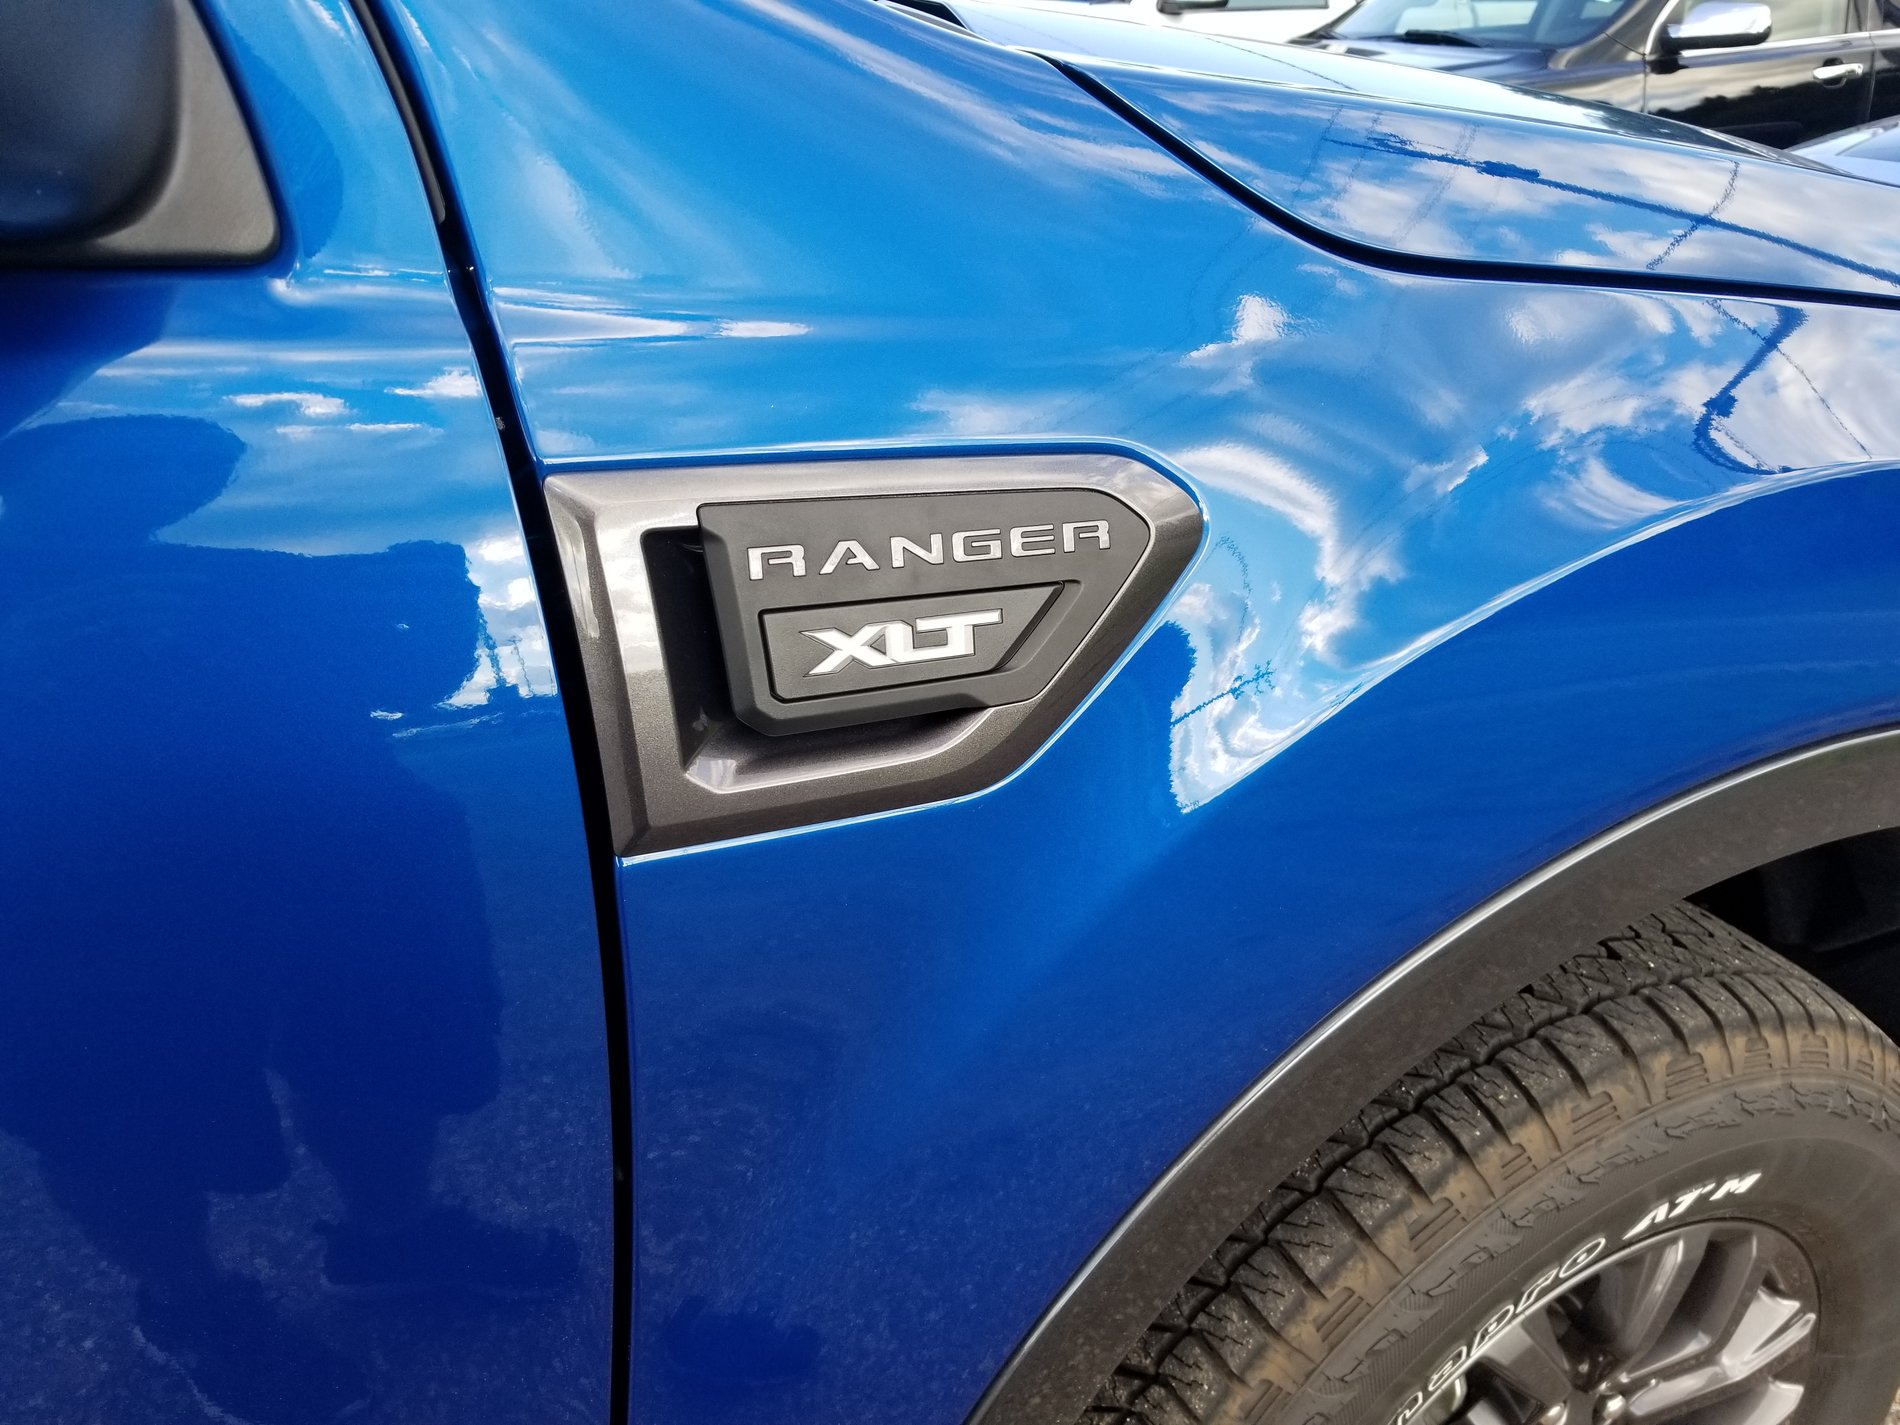 Ford Ranger Look at my Ranger parked next to stuff 20190717_183512